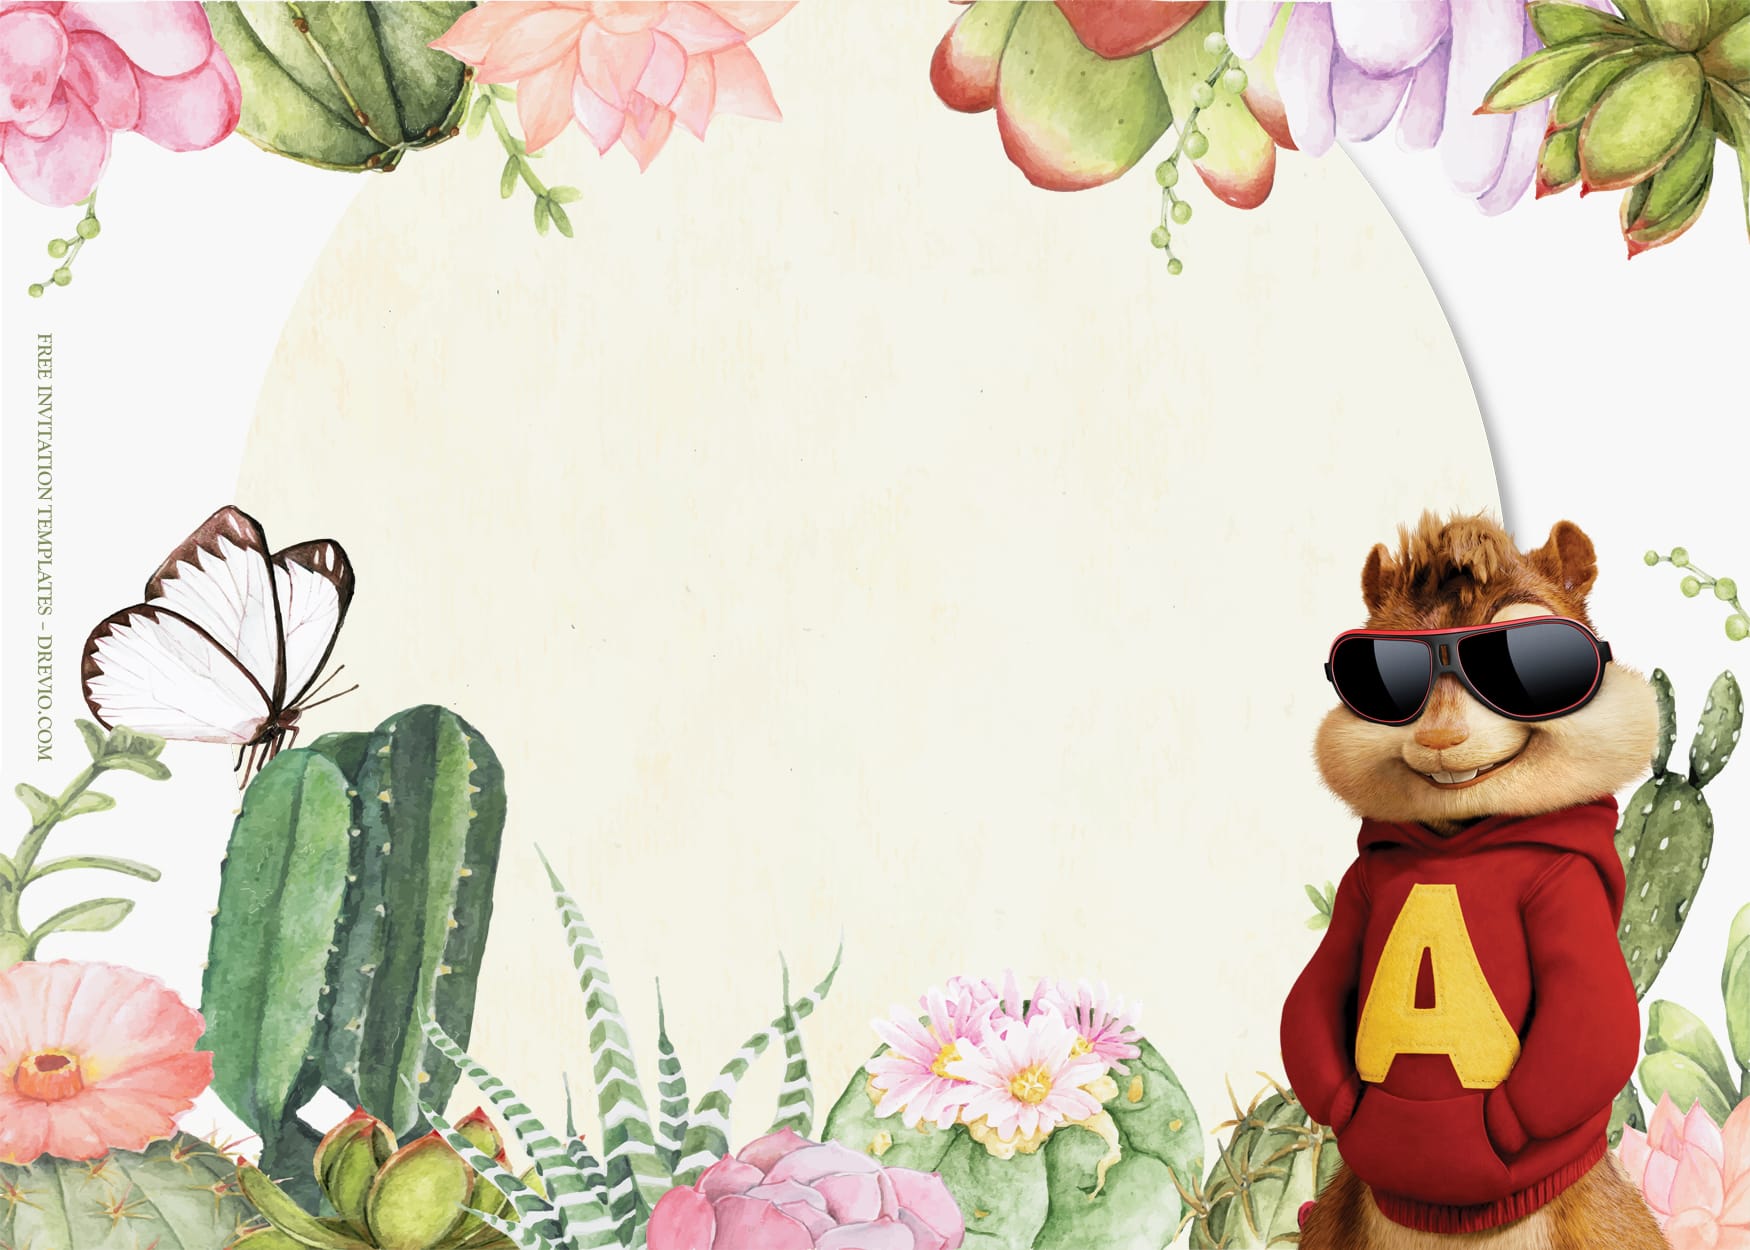 7+ Dancing And Singing Alvin And The Chipmunks Birthday Invitation Templates Type Six